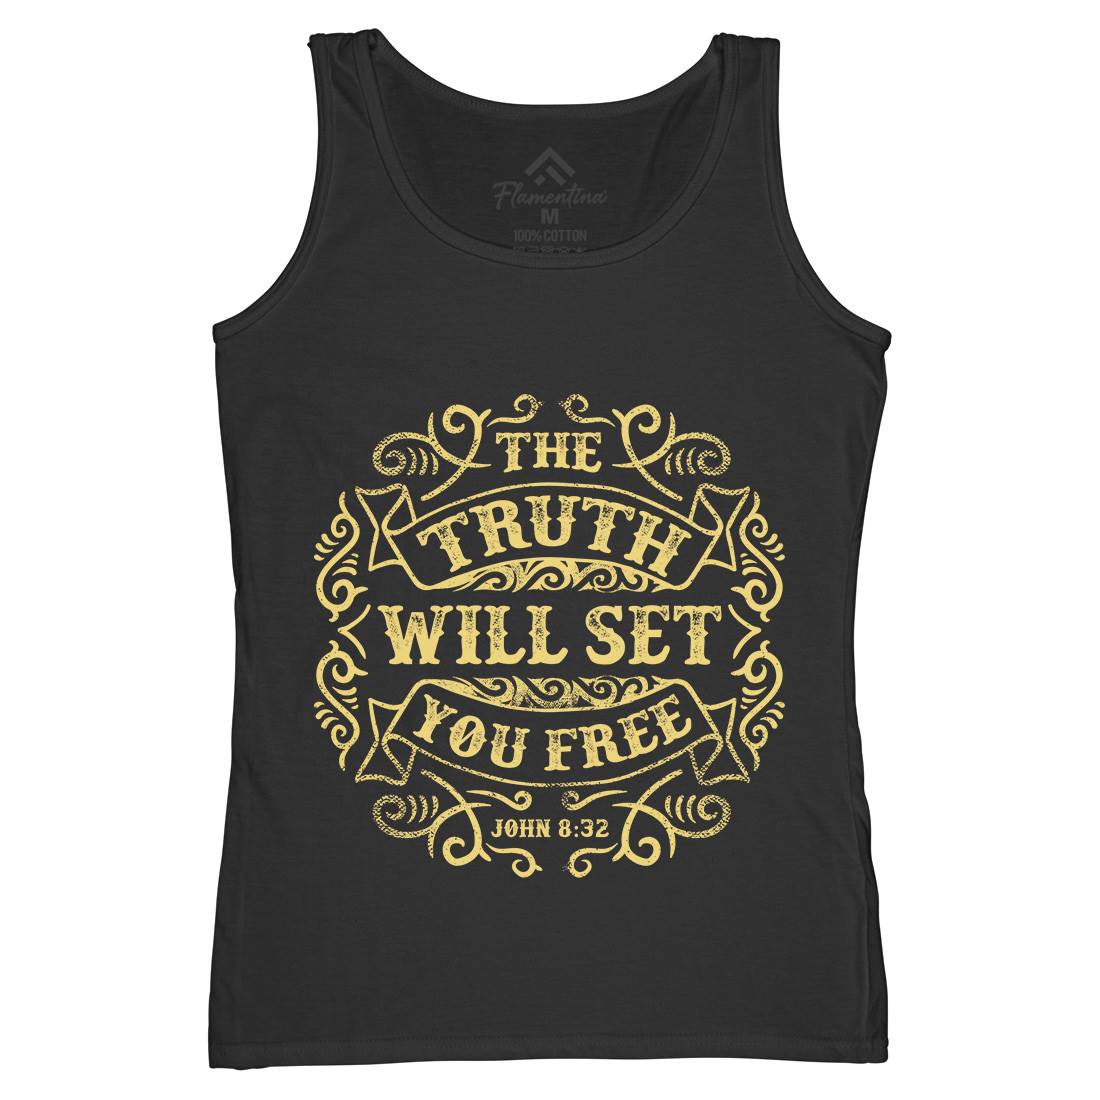 The Truth Will Set You Free Womens Organic Tank Top Vest Religion C990